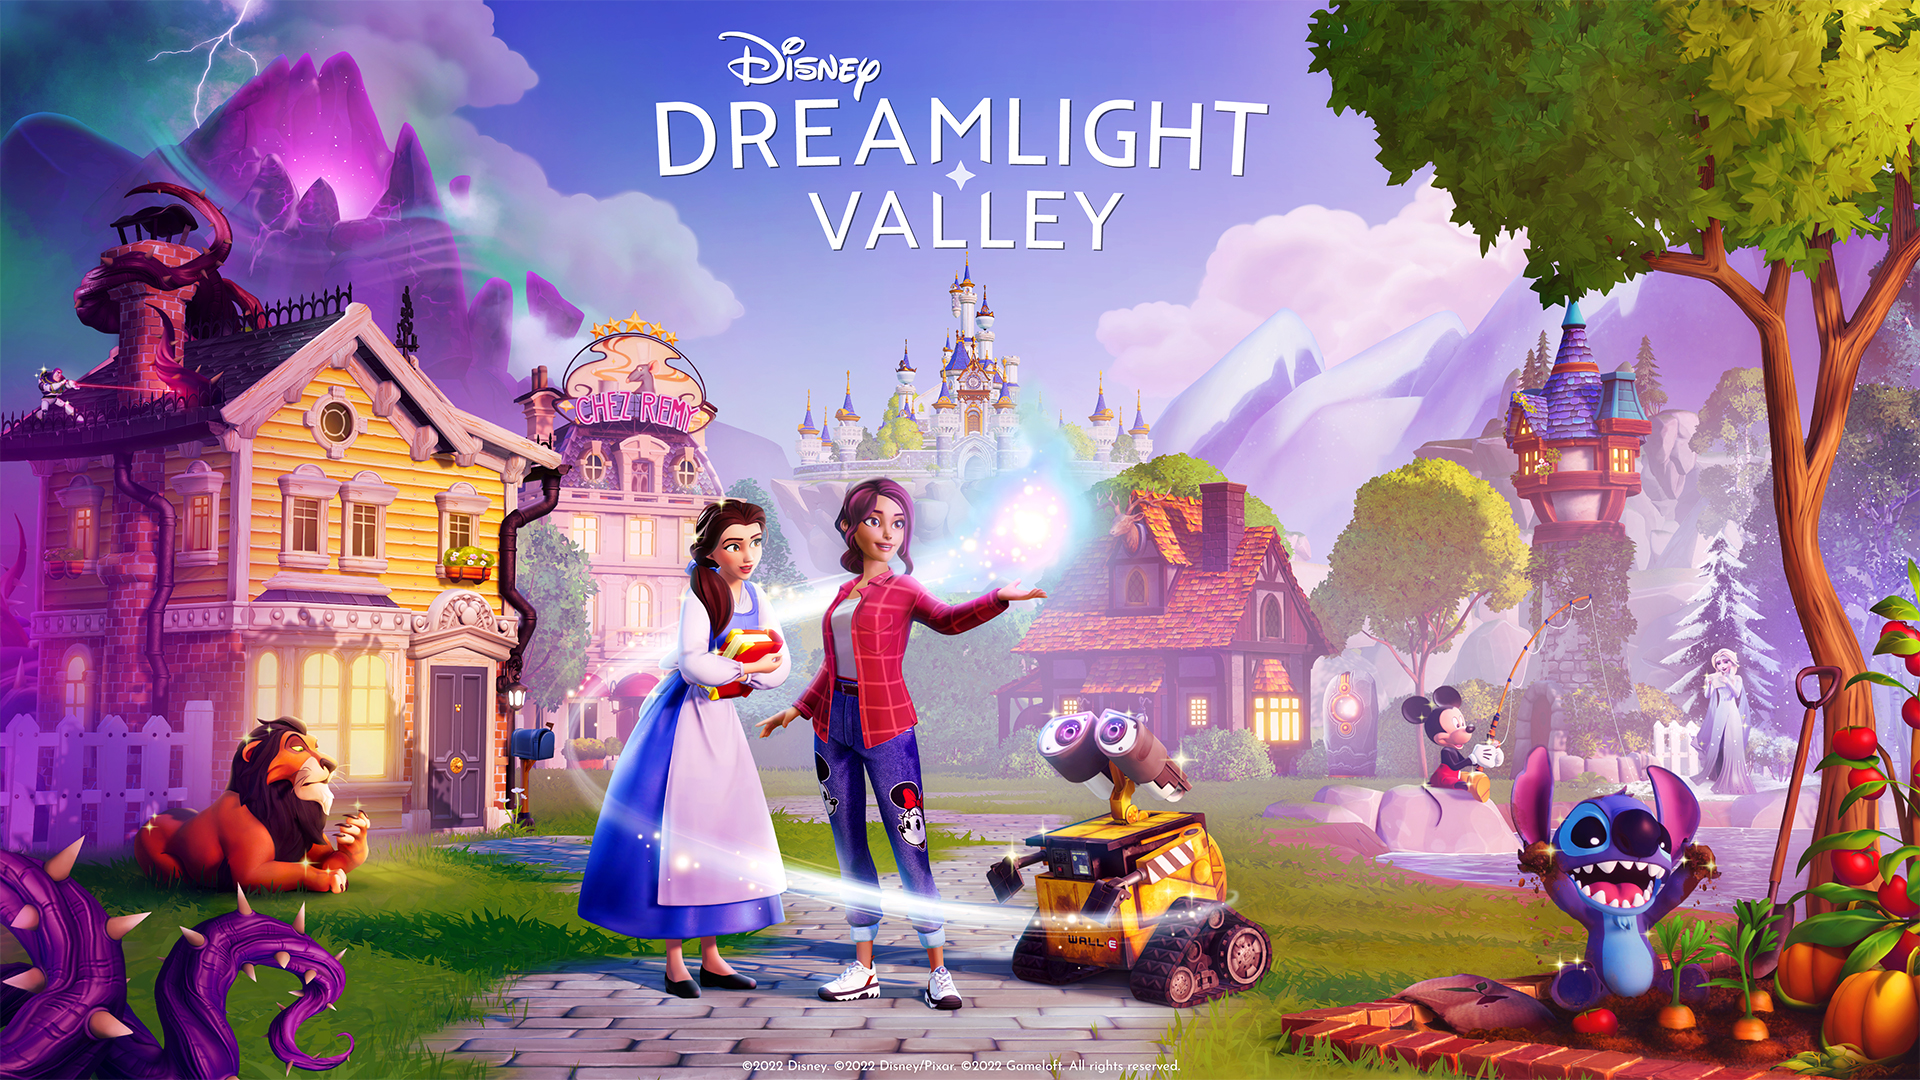 Disney Dreamlight Valley is a free-to-play life sim set in the Disneyverse